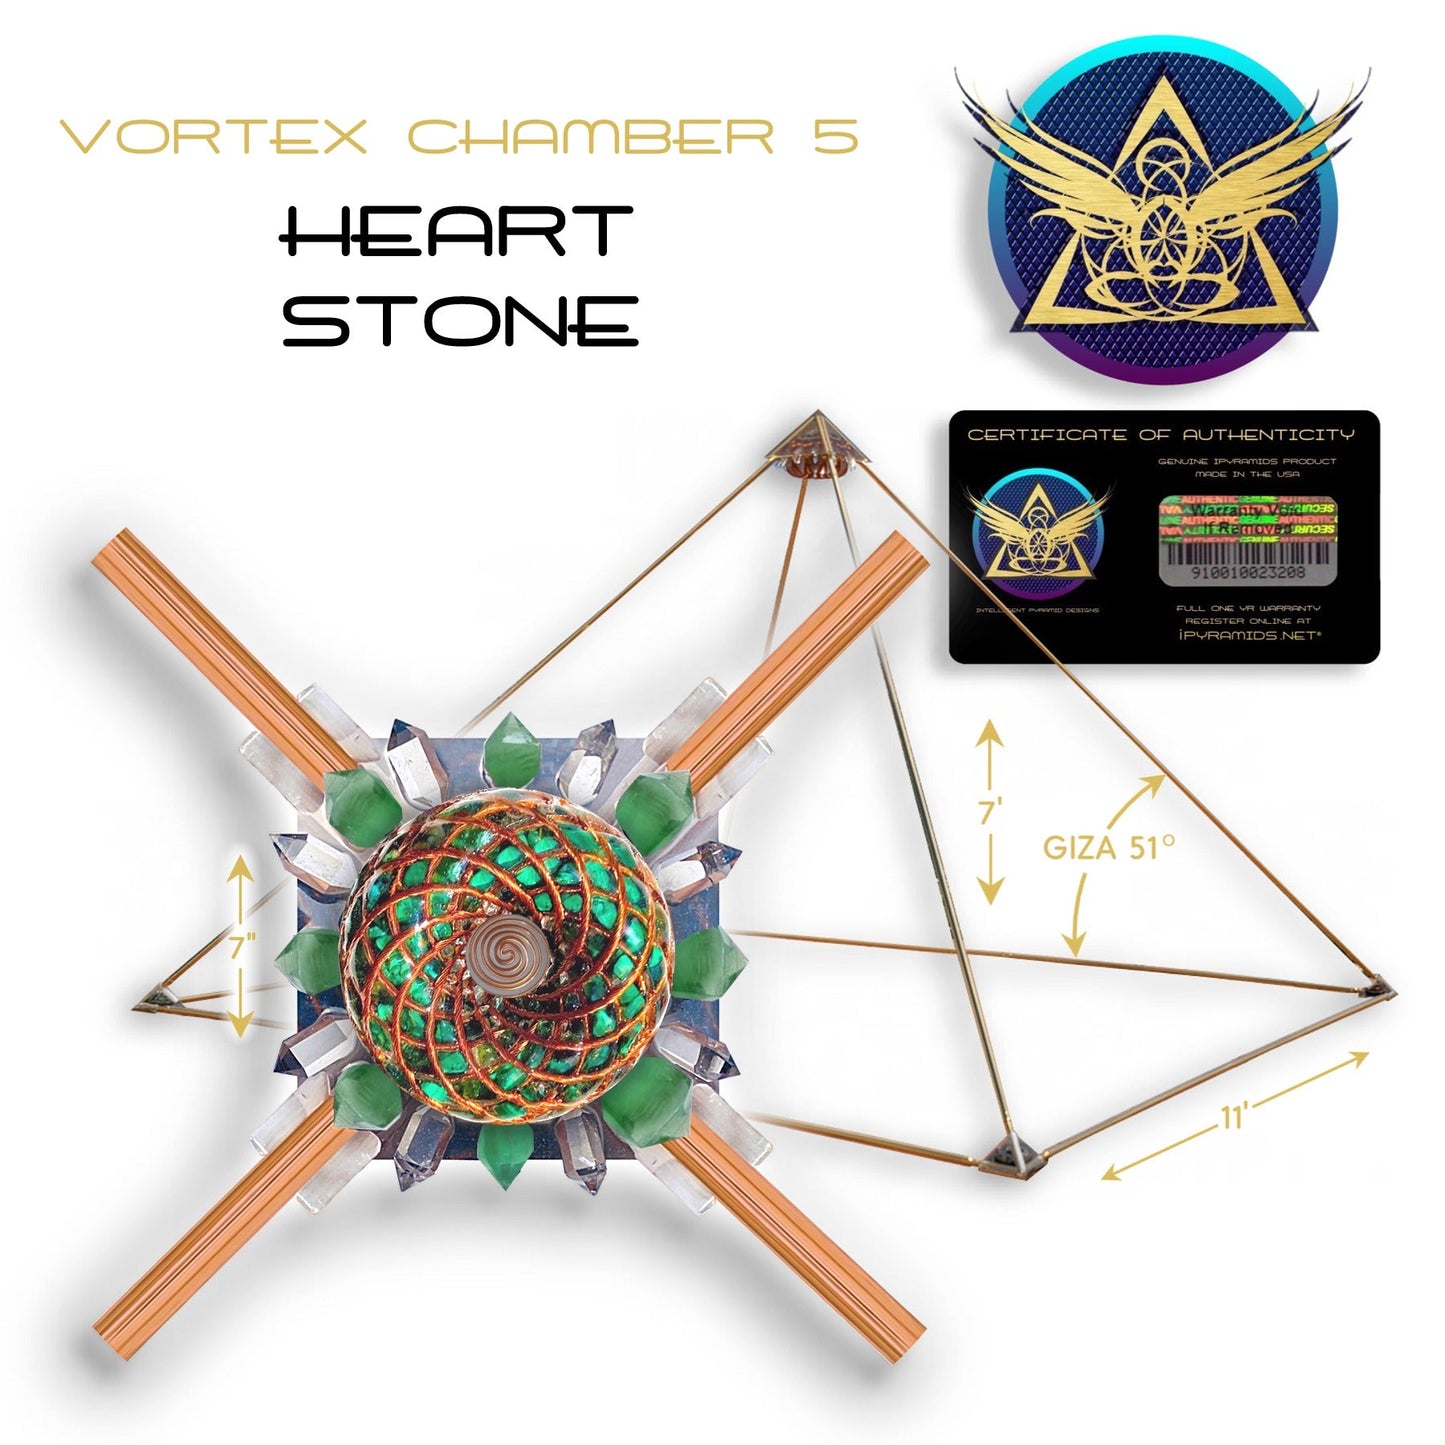 iPyramid i5 Nubian: Mastering Vibrational Excellence with the Tachyon Vortex Field + FREE iTorus 5